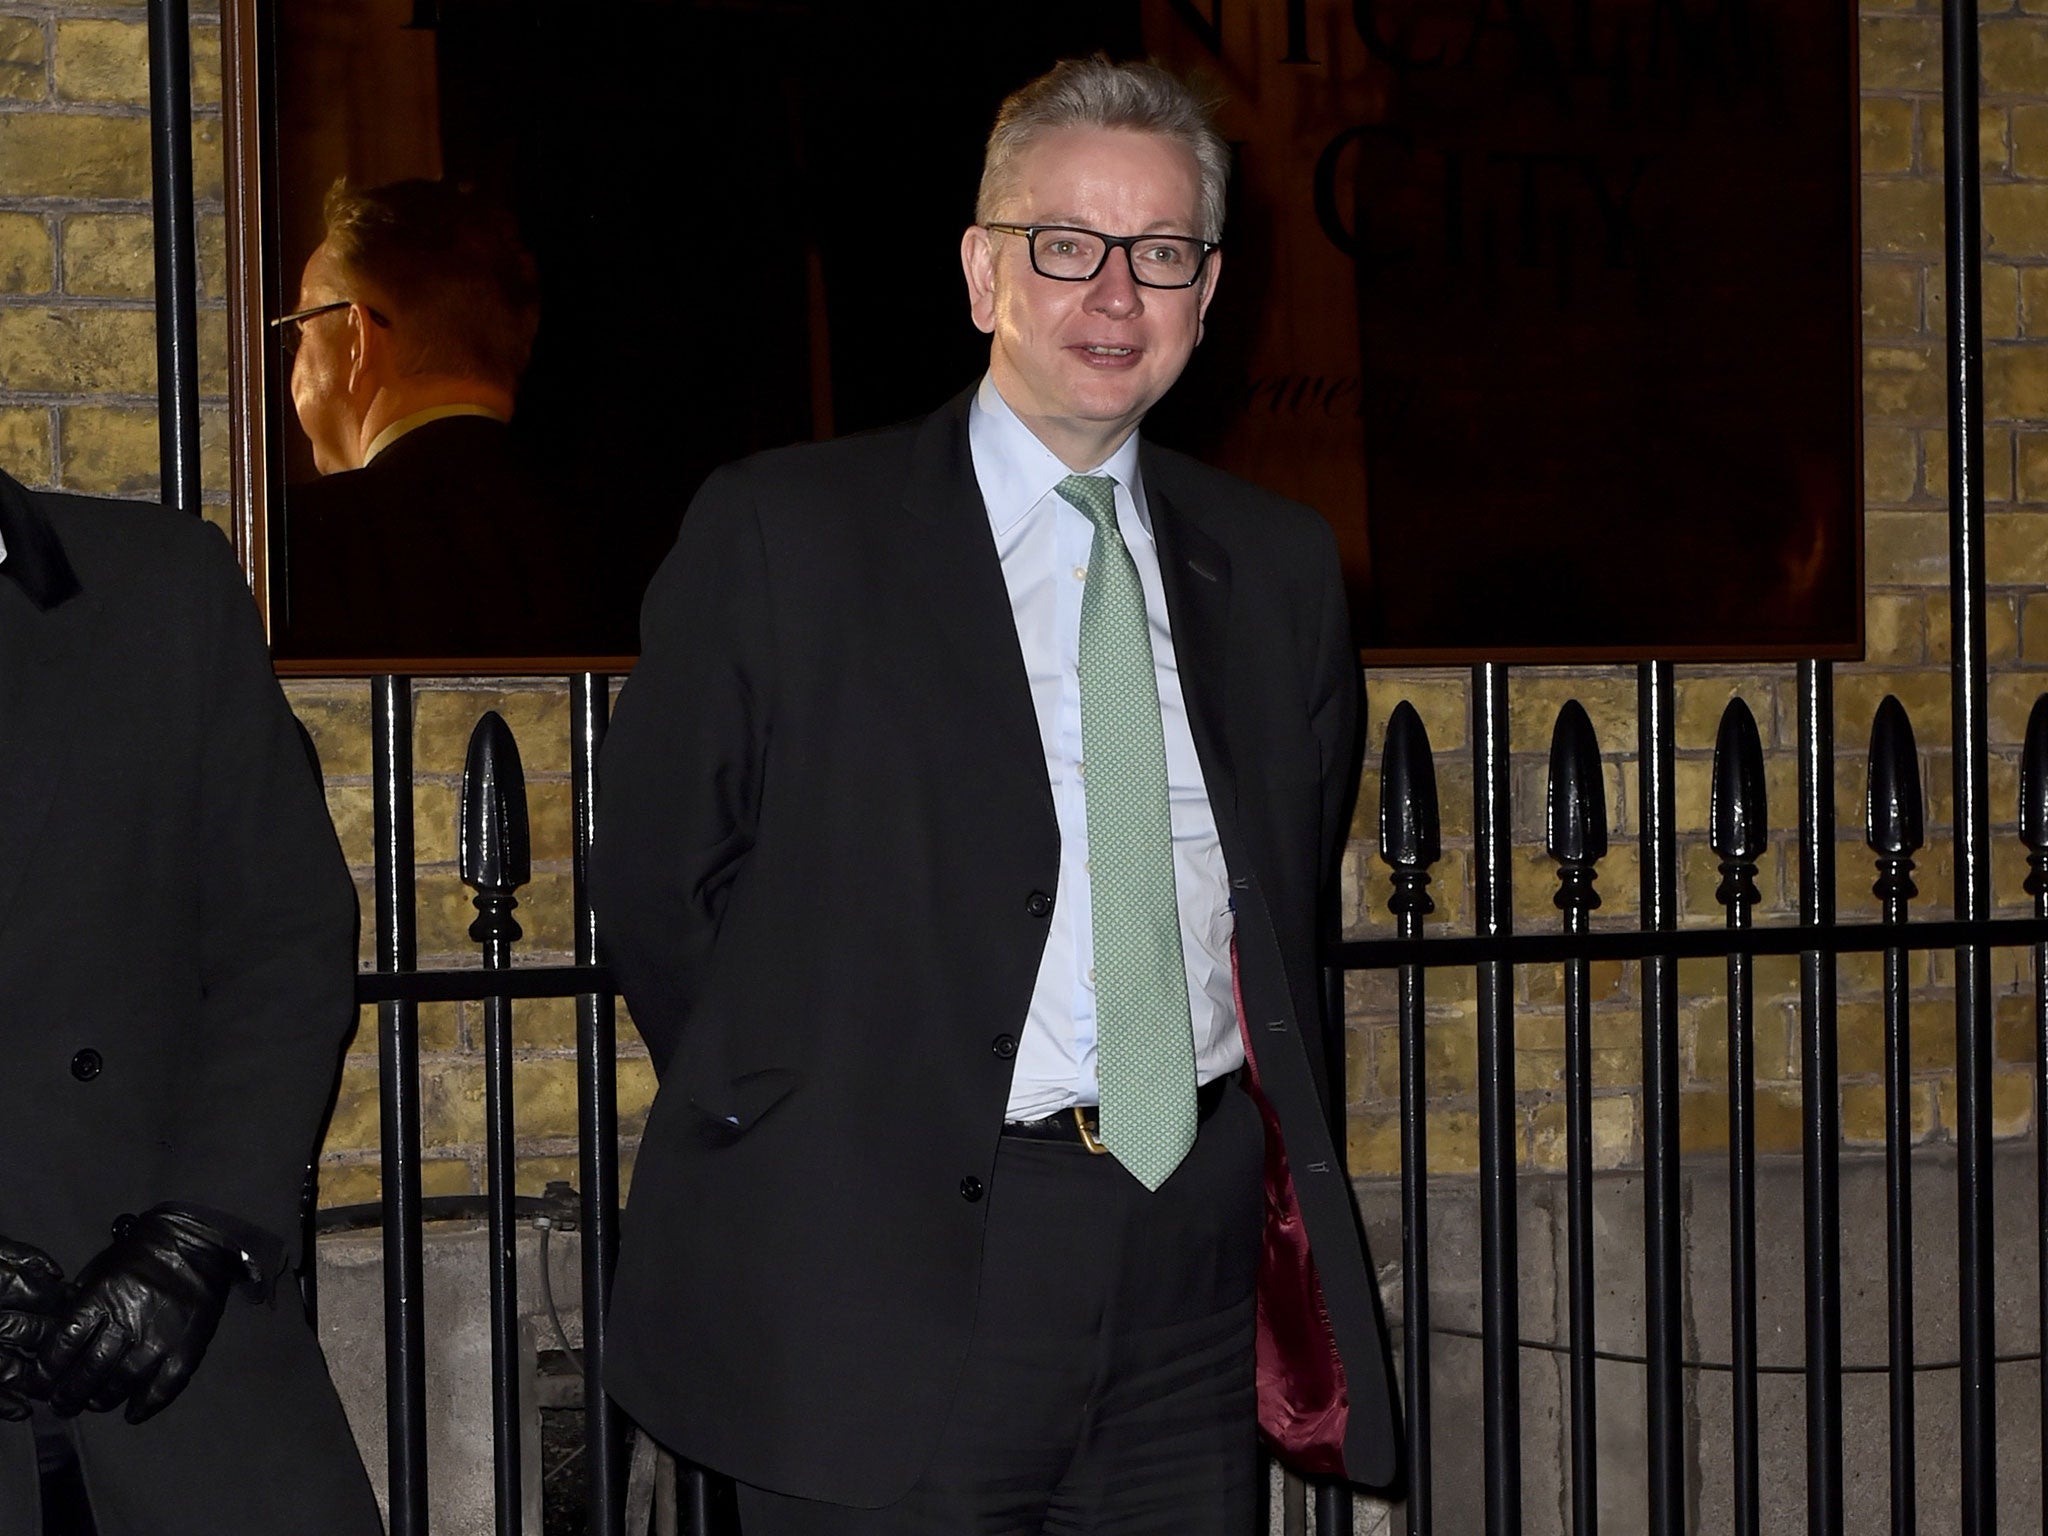 Michael Gove arrives at a Conservative party Black & White Ball fundraiser at the Chiswell Brewery, London